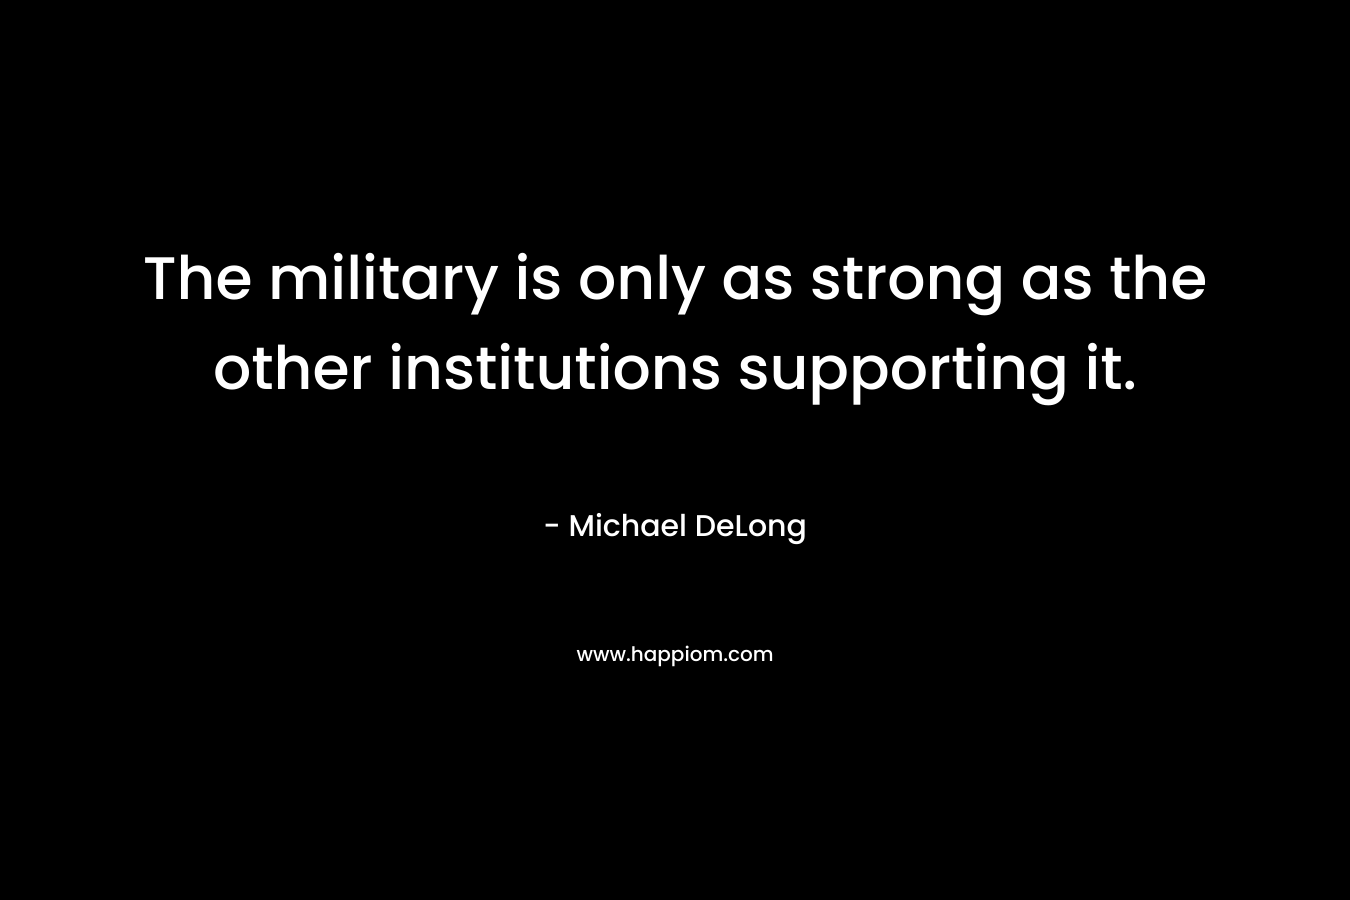 The military is only as strong as the other institutions supporting it.